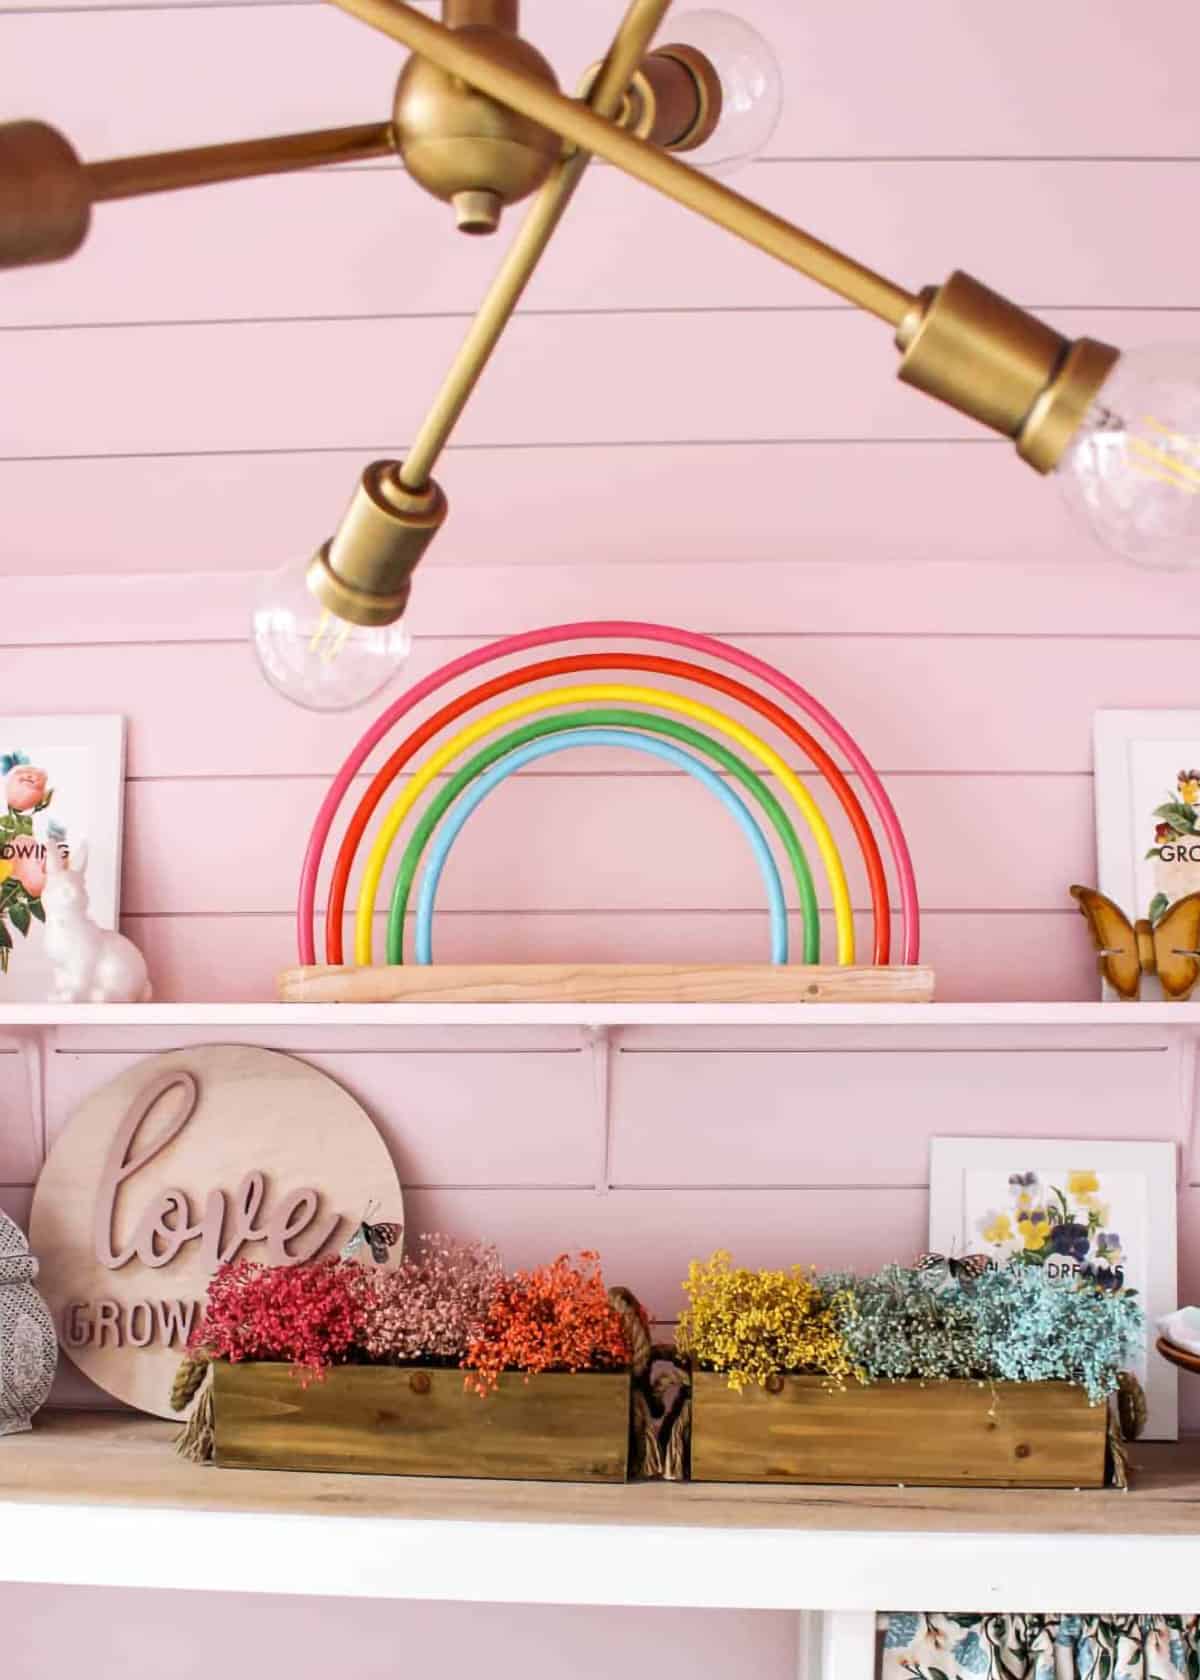 Shelves holding rainbow decorations in front of a pink wall.